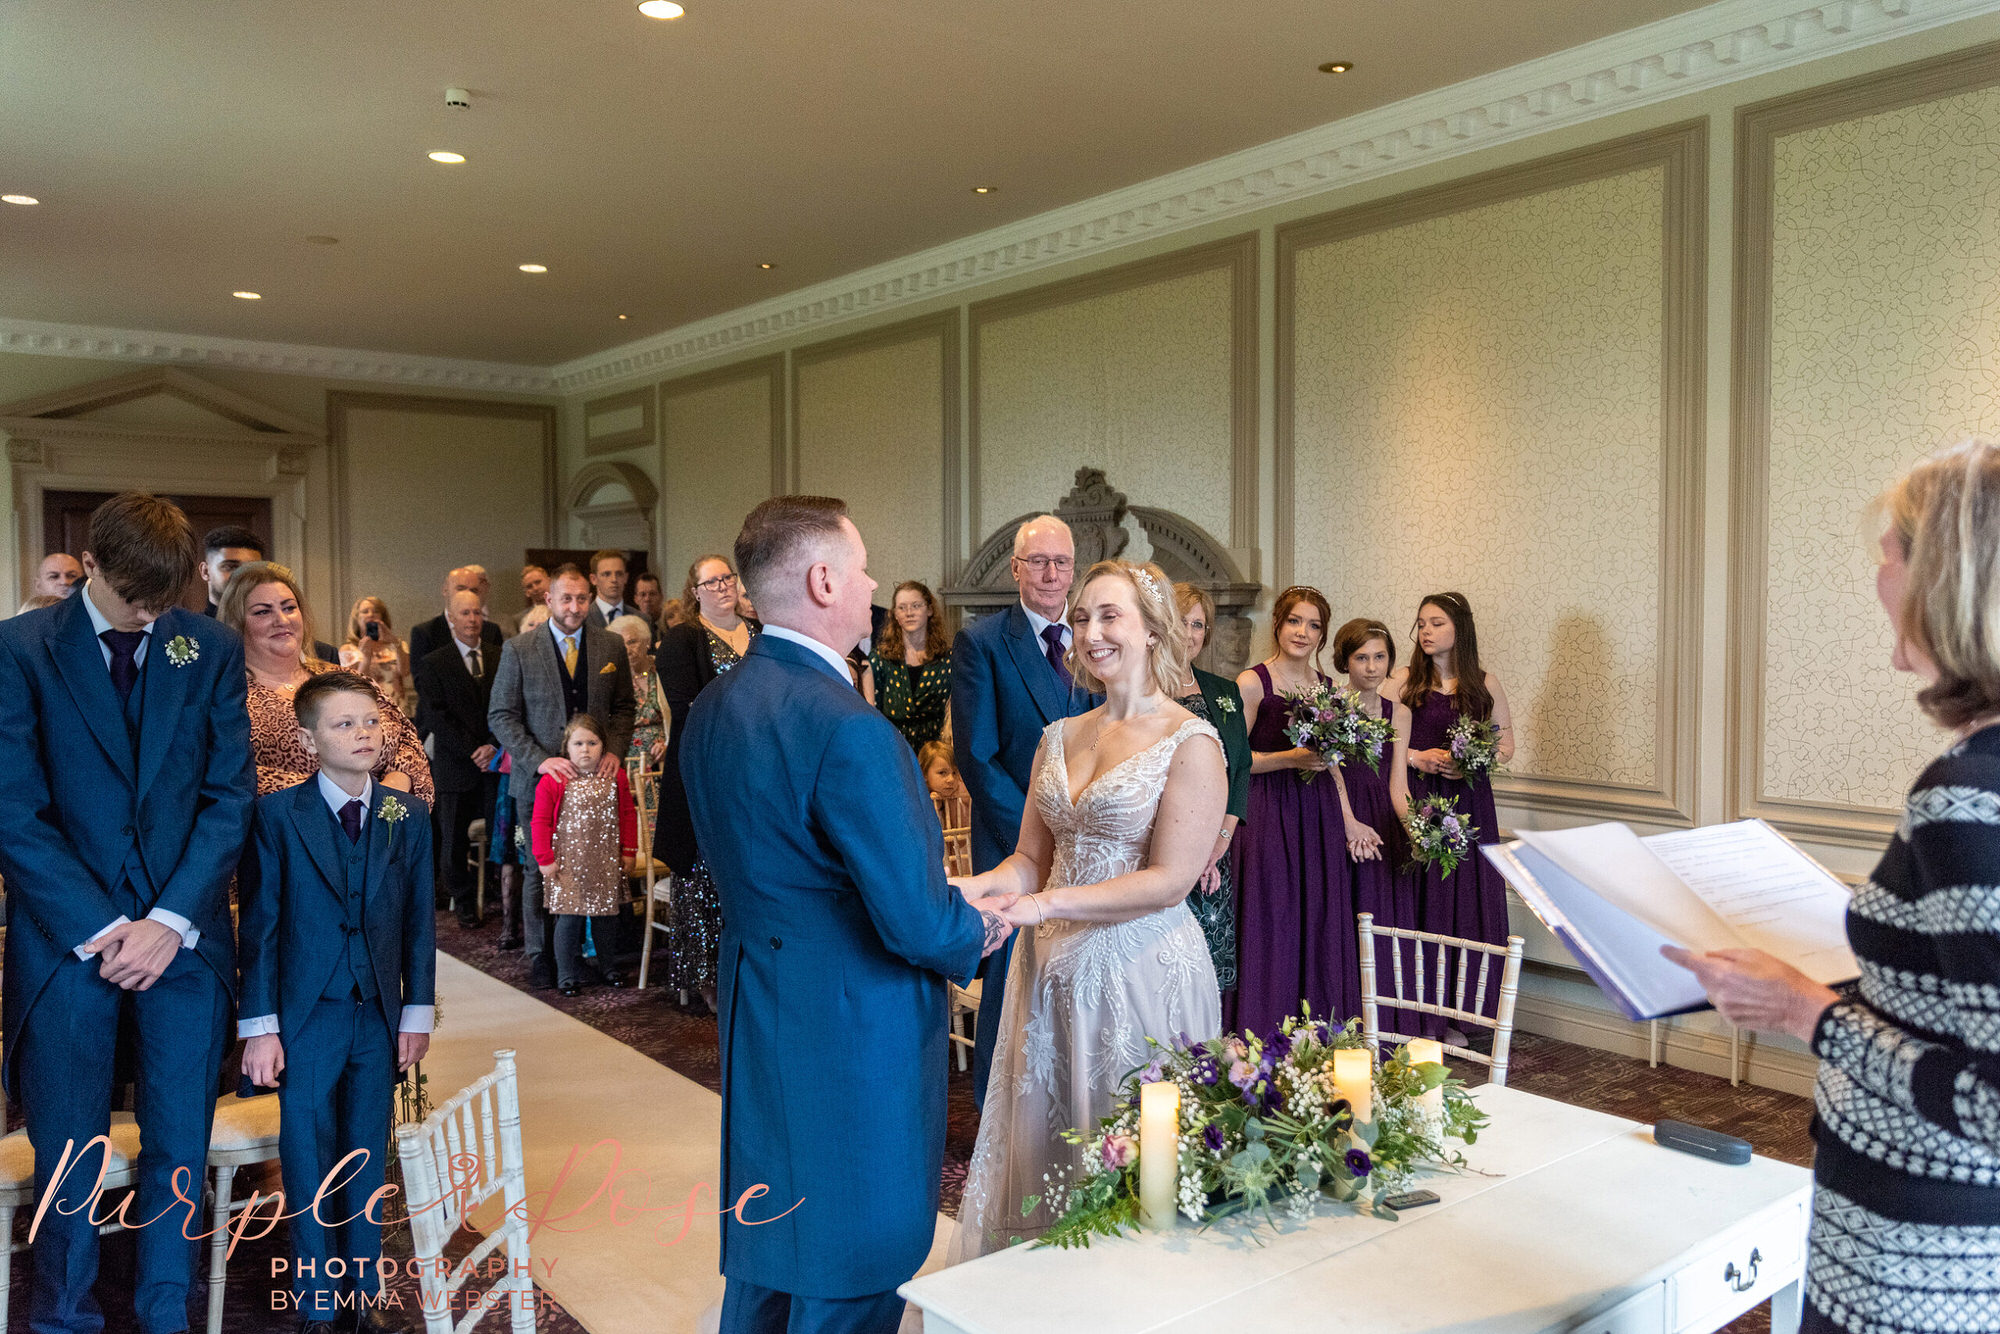 Bride and groom surrounded by guests during wedding ceremony